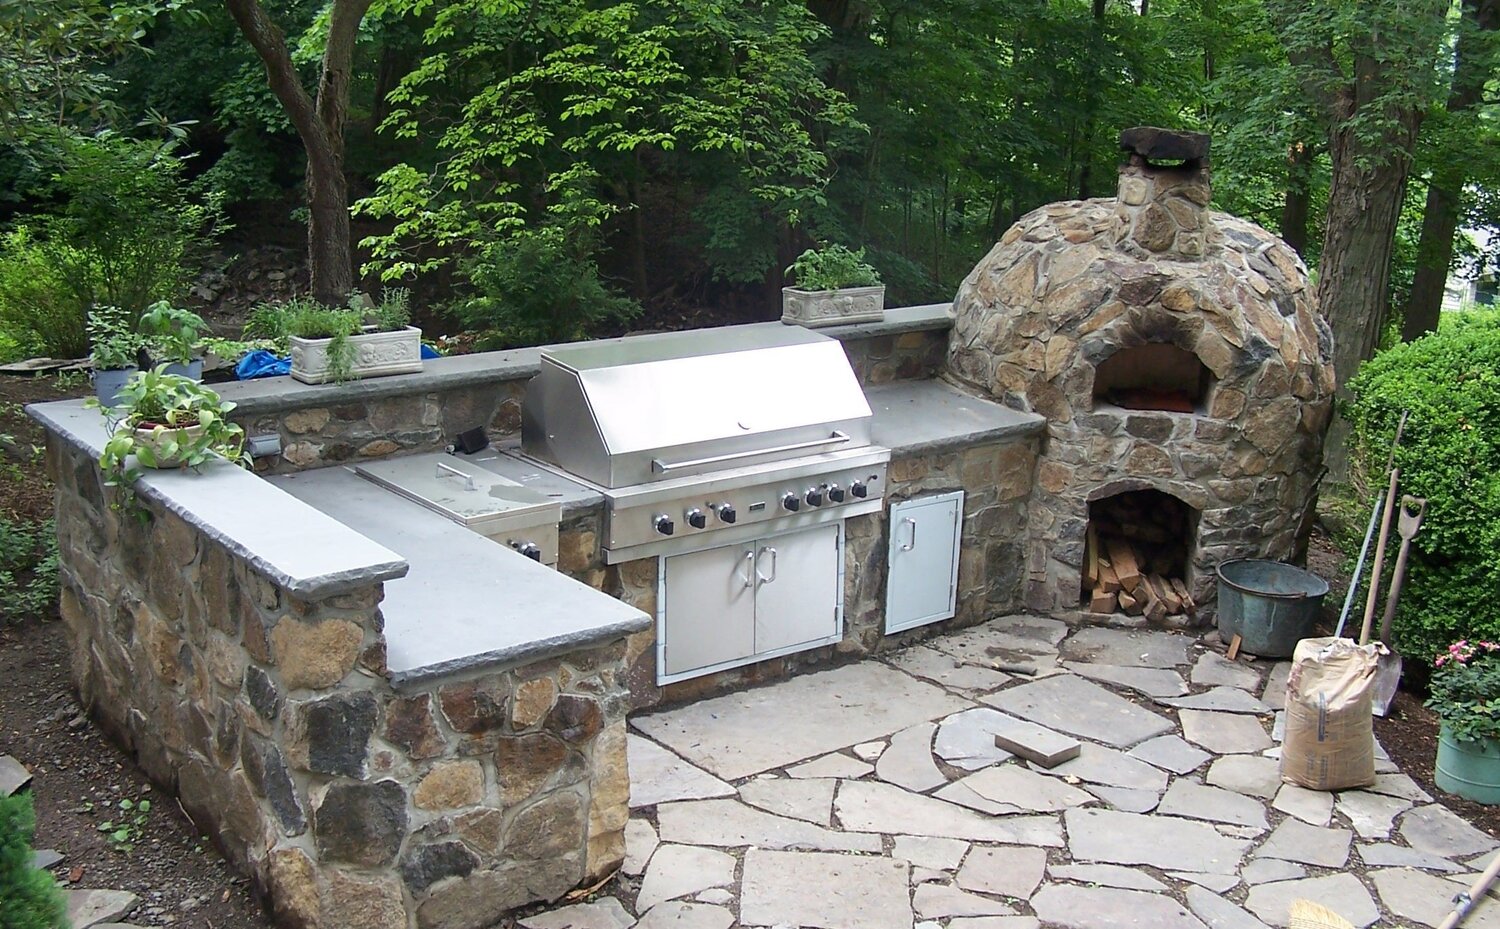 Where it is best to place your new outdoor kitchen - OF